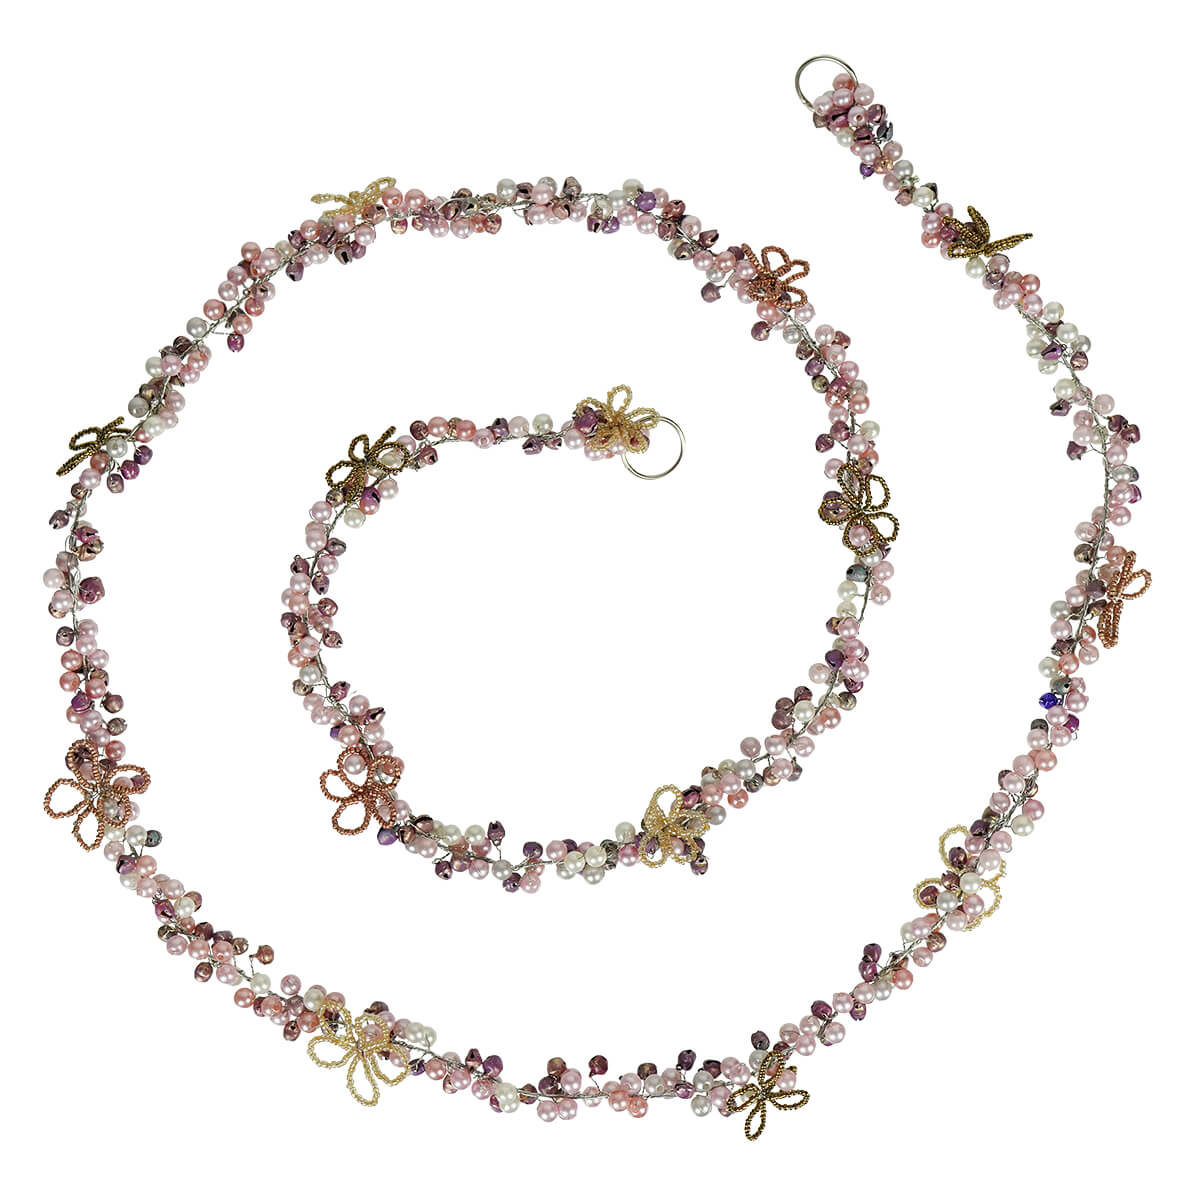 Pastel Colored Glass Bead Garland With Flowers